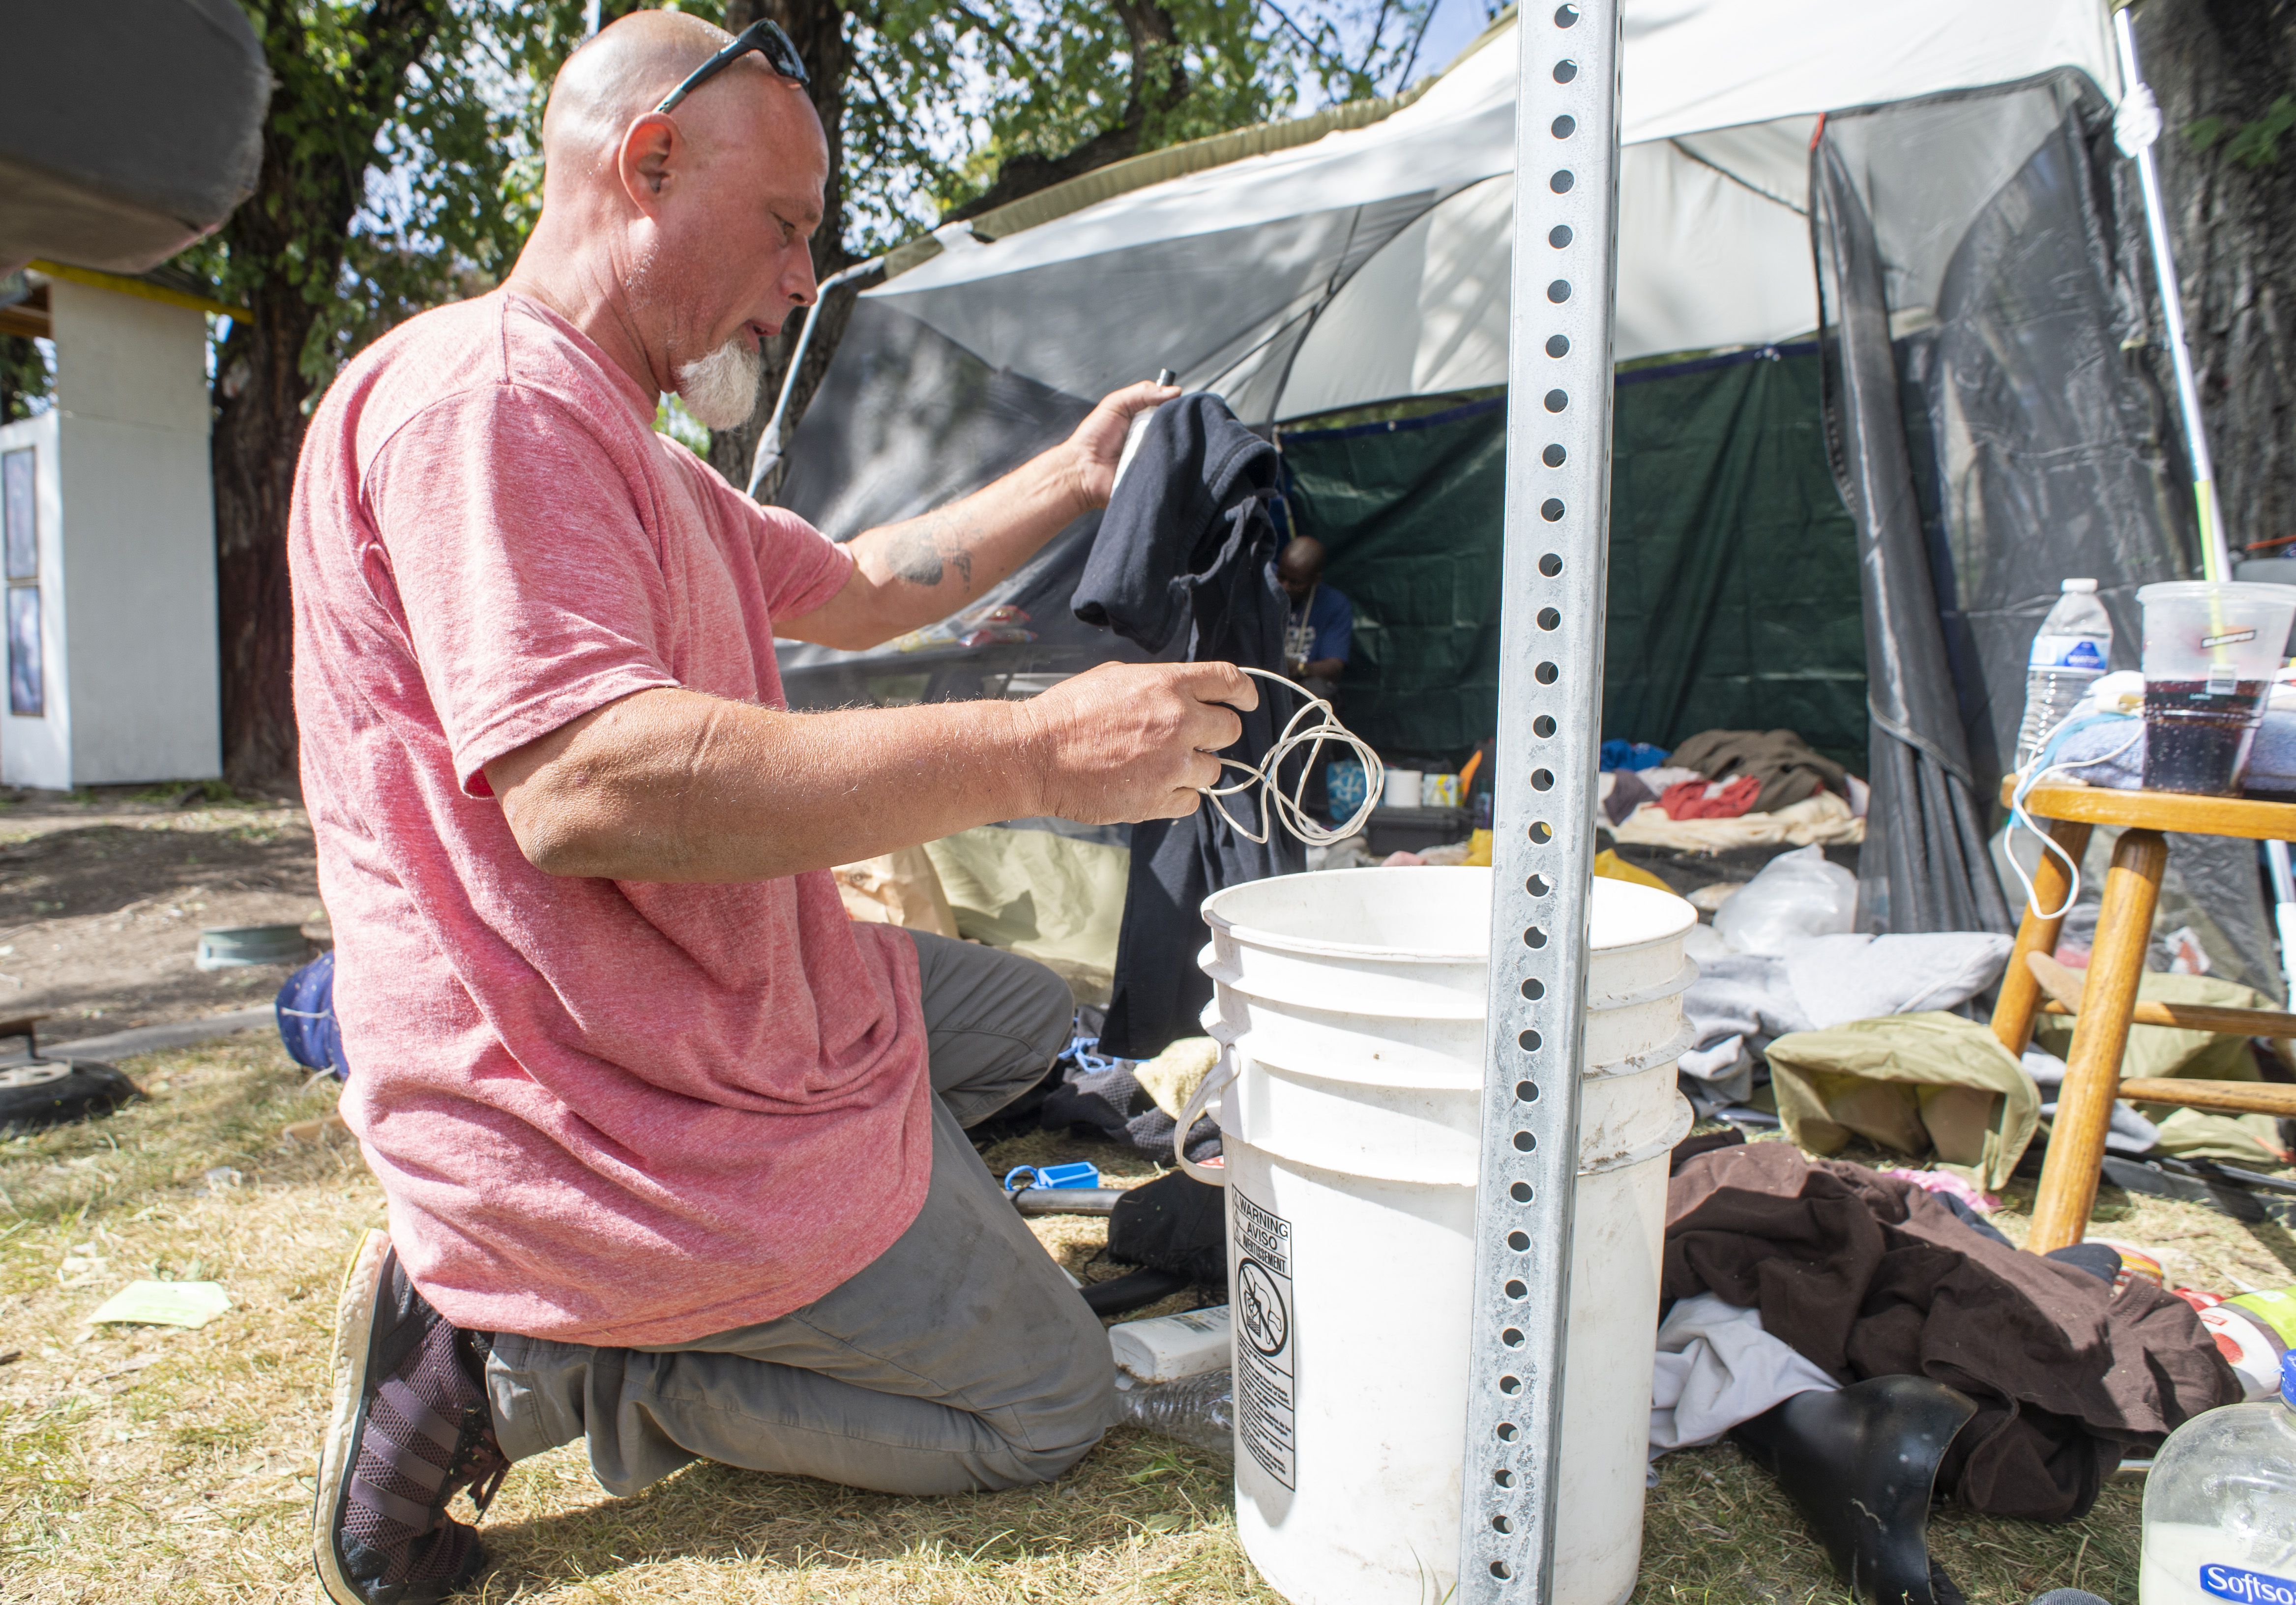 (Rick Egan  |  The Salt Lake Tribune) Richard Ryan prepares to move his camp on Wednesday, Sept. 9, 2020, after getting notified that first thing in the morning he will be forced to move from Taufer Park in Salt Lake City, fearing everything will be taken from him if he is not prepared when they arrive.